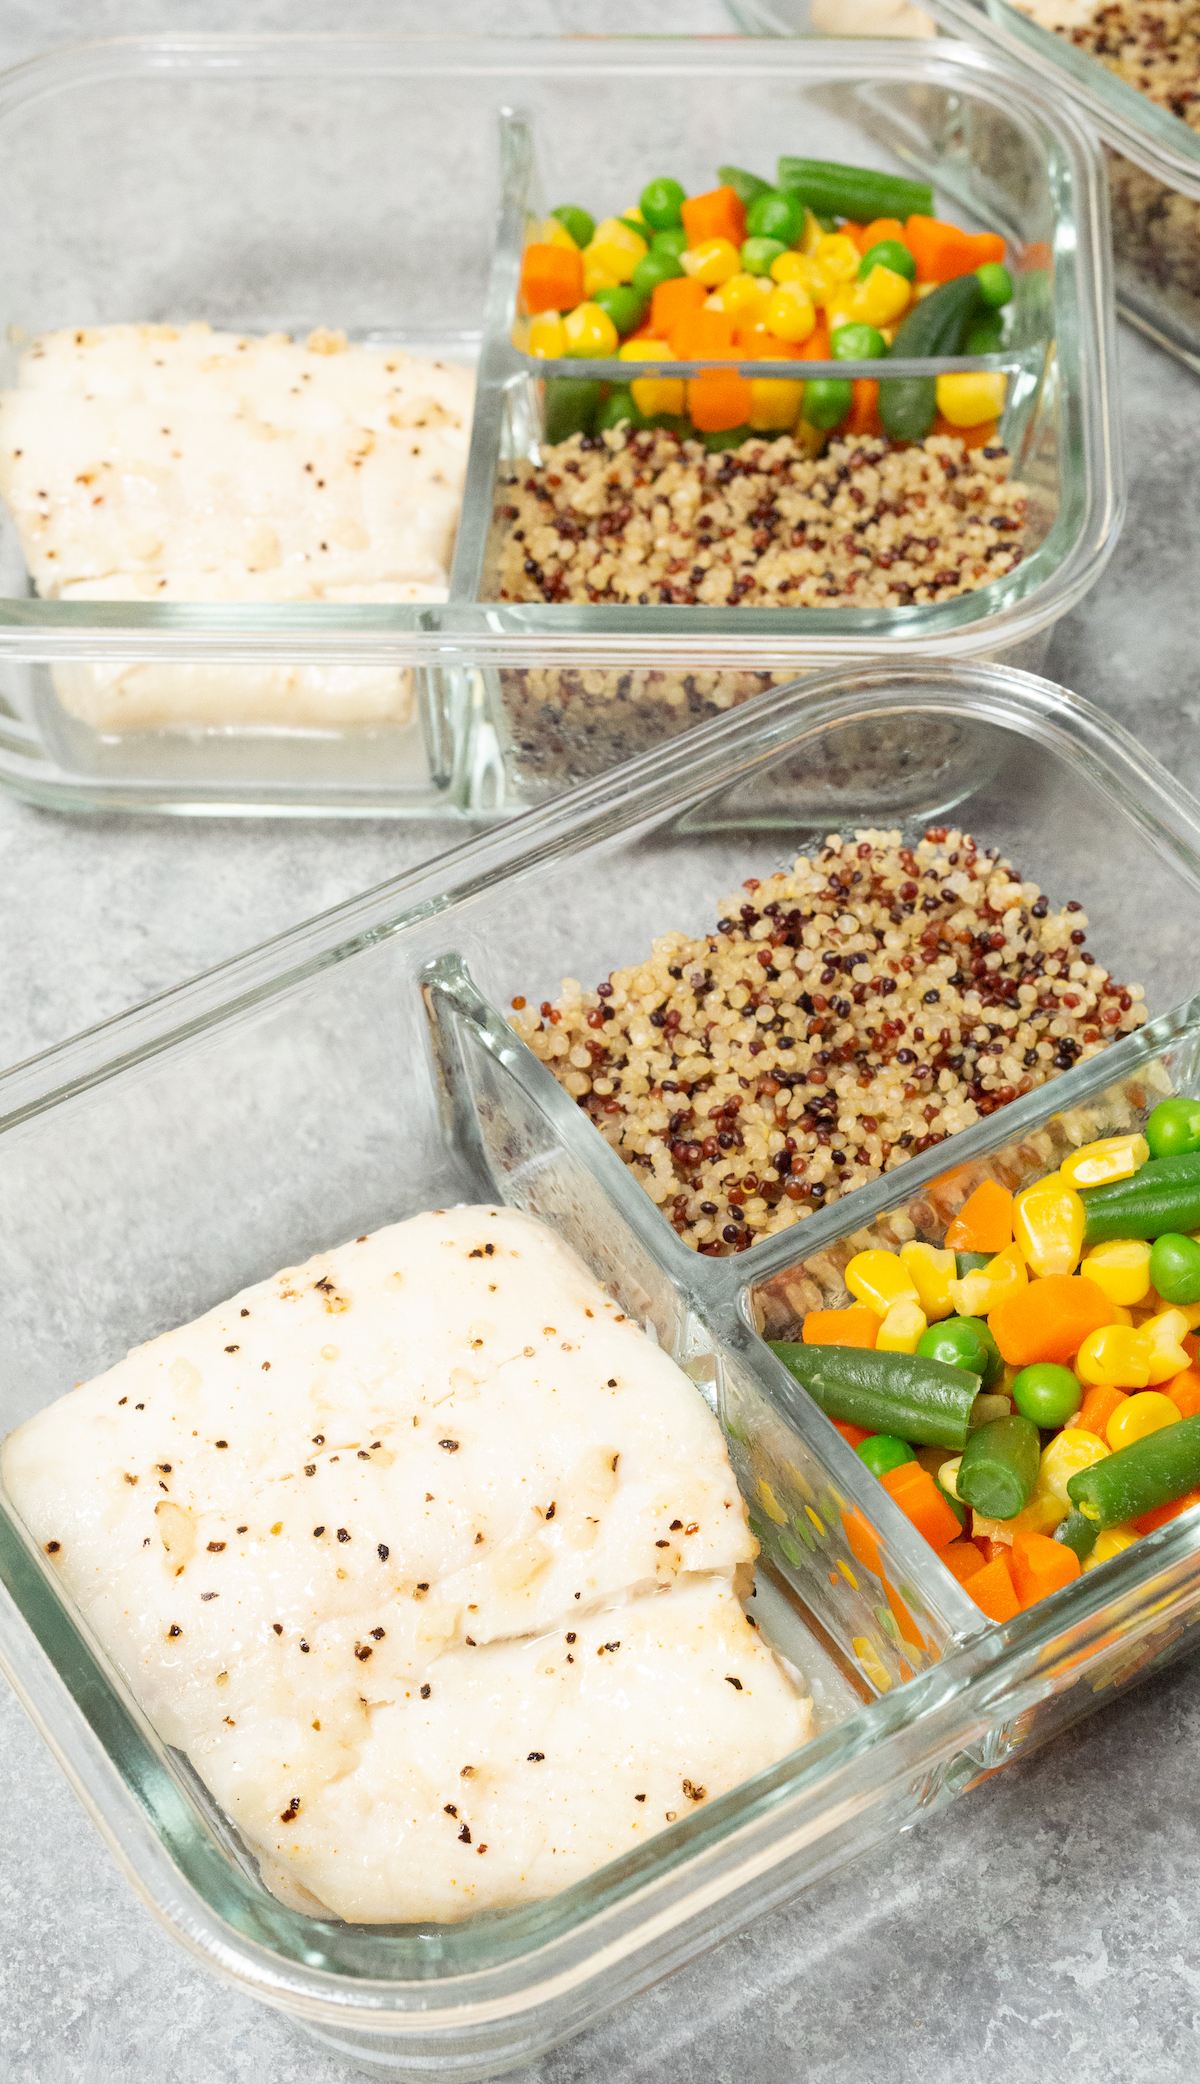 Two glass meal prep containers filled with a white fish fillet, mixed vegetables, and quinoa.